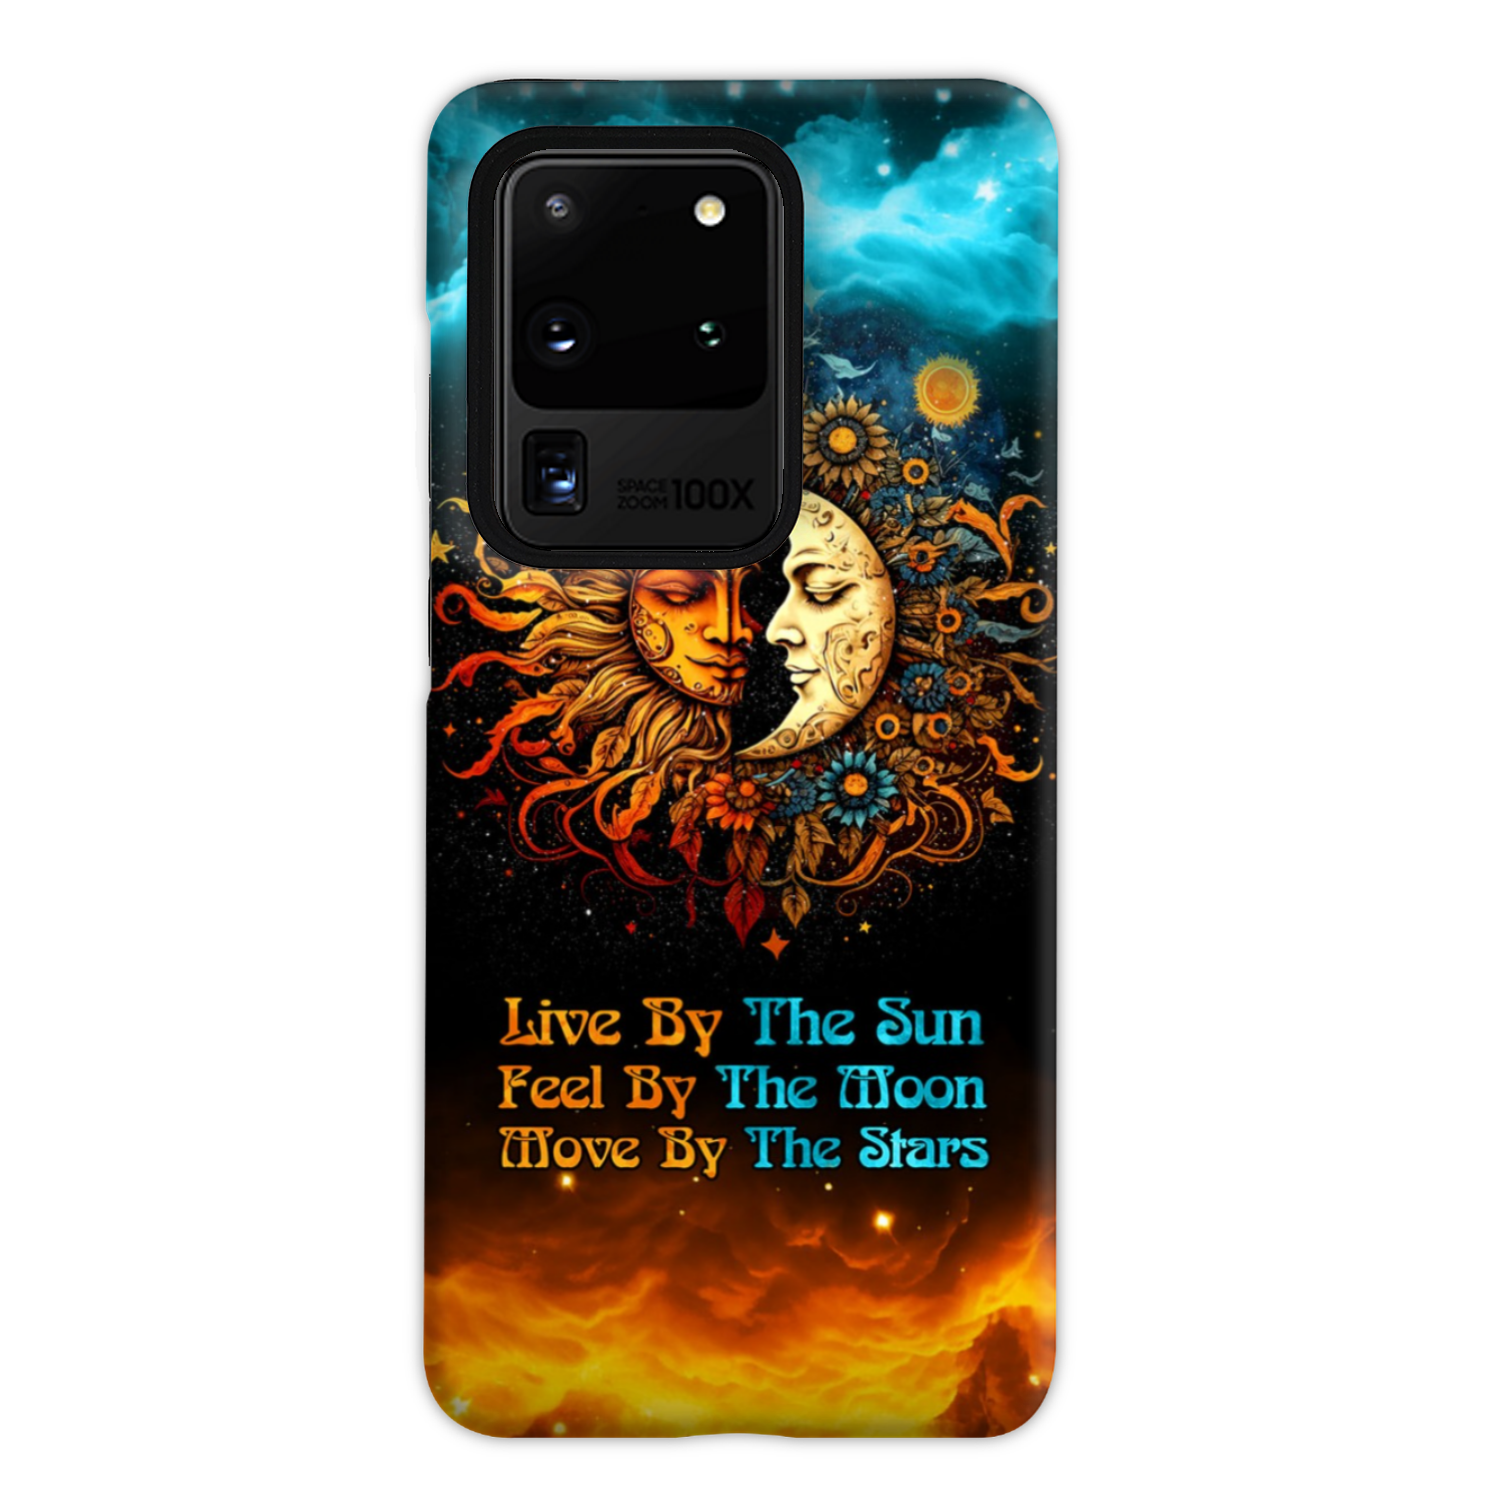 LIVE BY THE SUN PHONE CASE - TYTM2702231